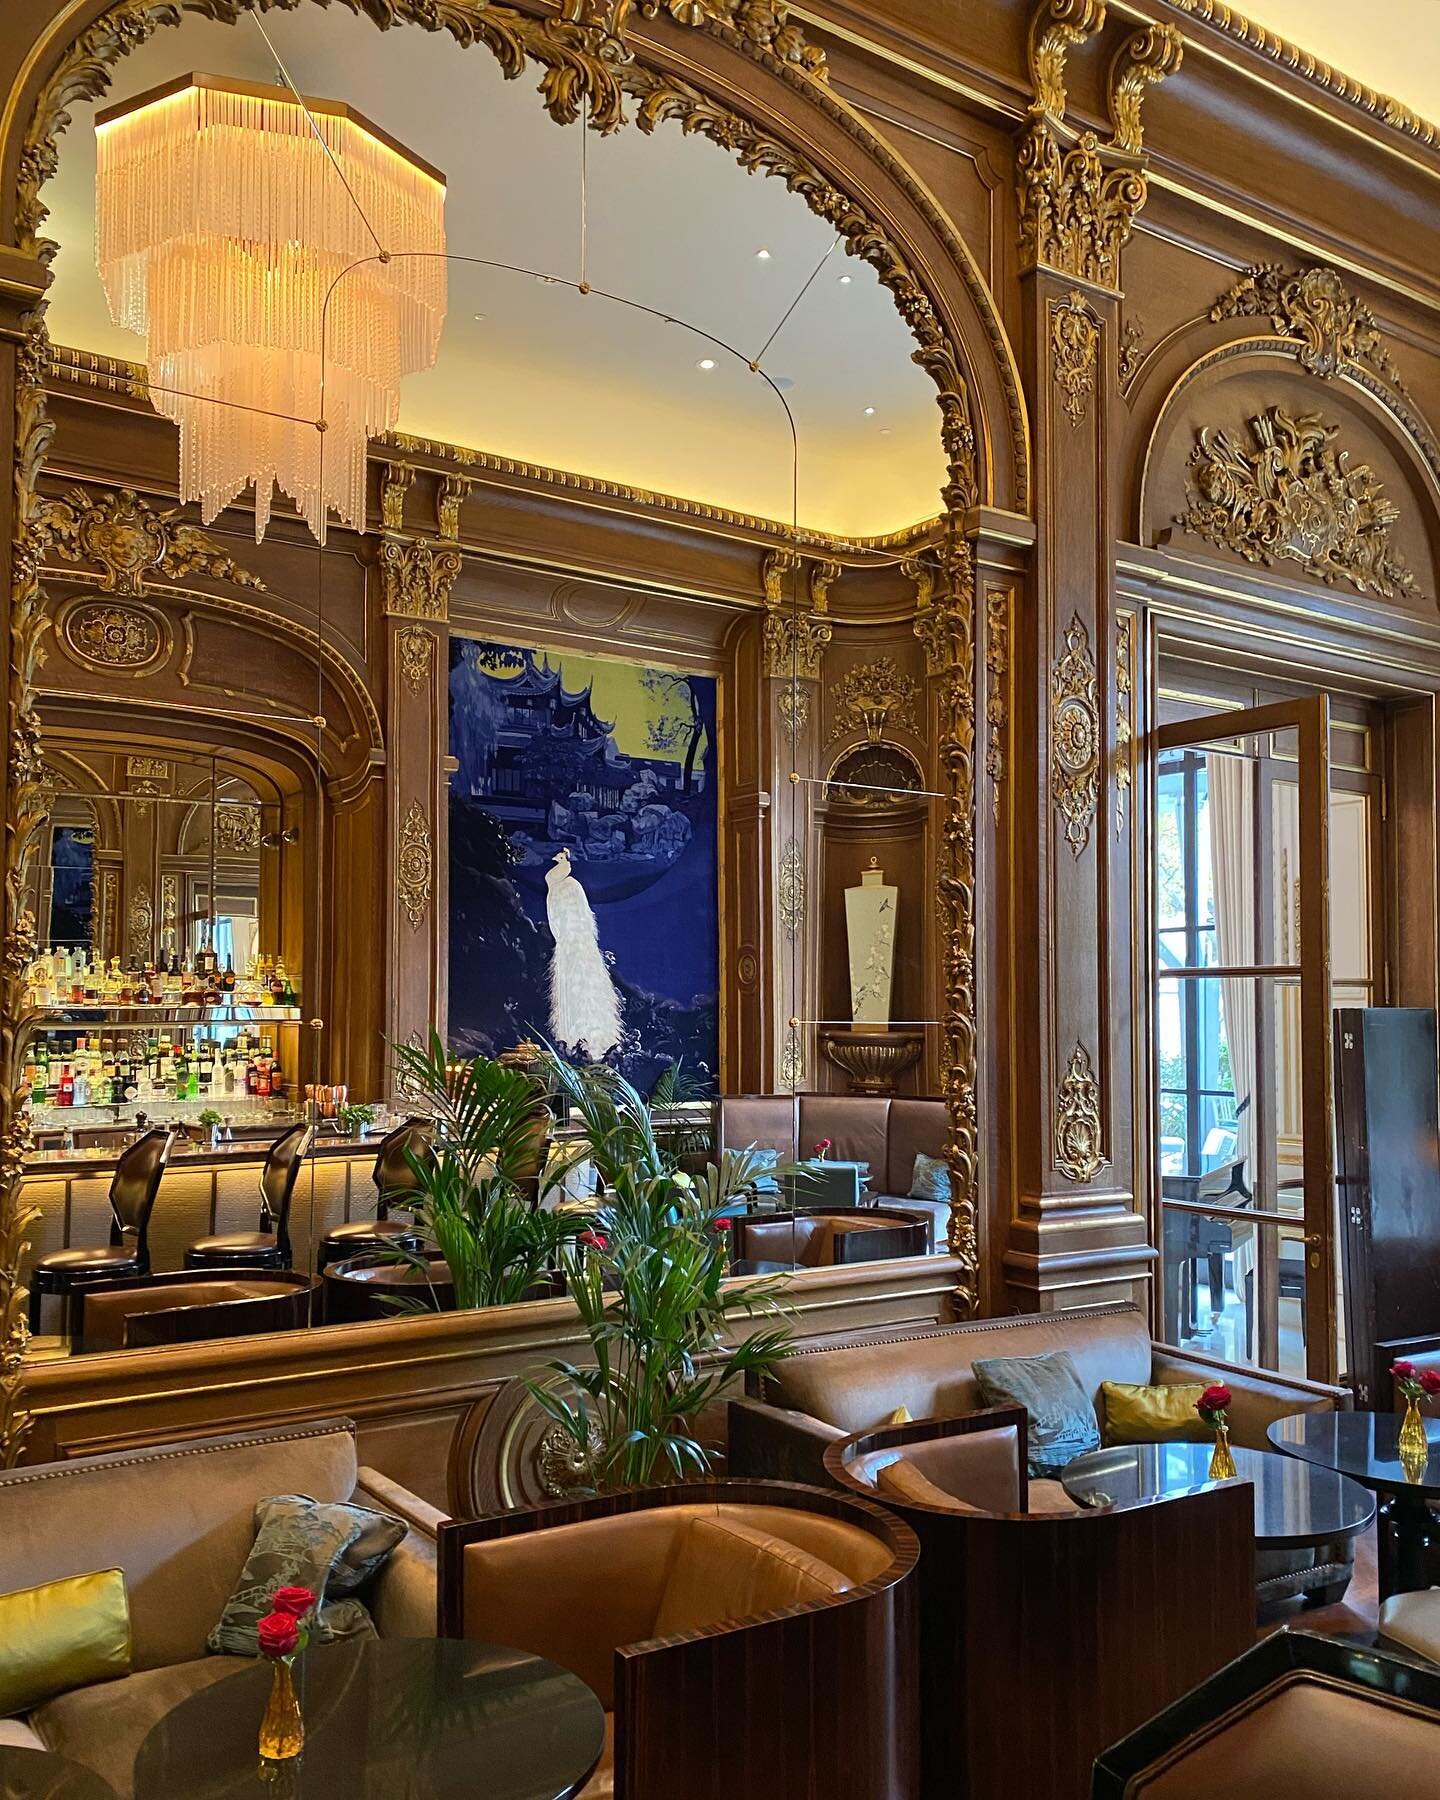 A wonderful stay at one of our favorite Parisian addresses, The Peninsula Paris. From the historic Bar Kl&eacute;ber where the Paris Peace Accords were negotiated, to the sumptuous suites with every luxury you can imagine, The Peninsula makes for the